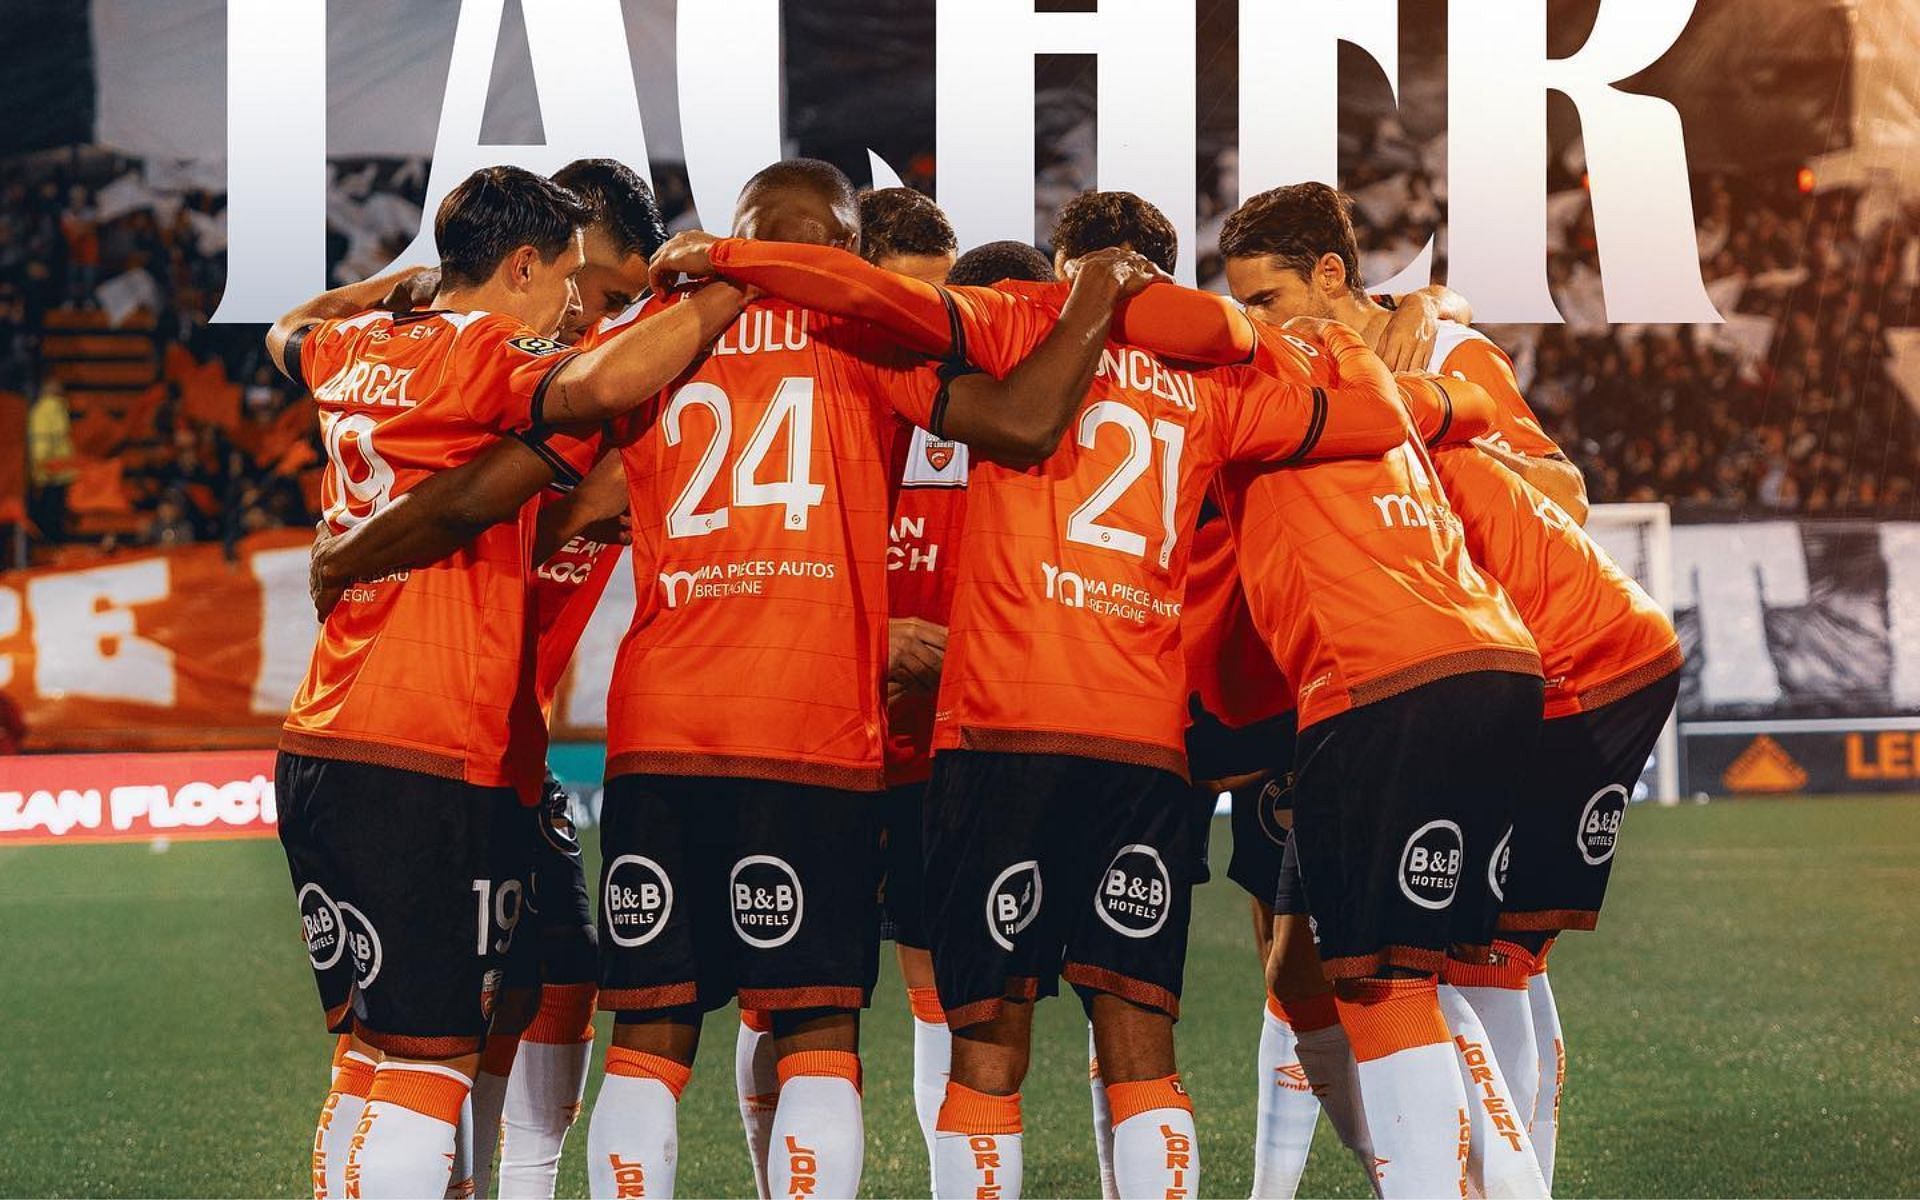 Can Lorient claim a positive result this weekend?